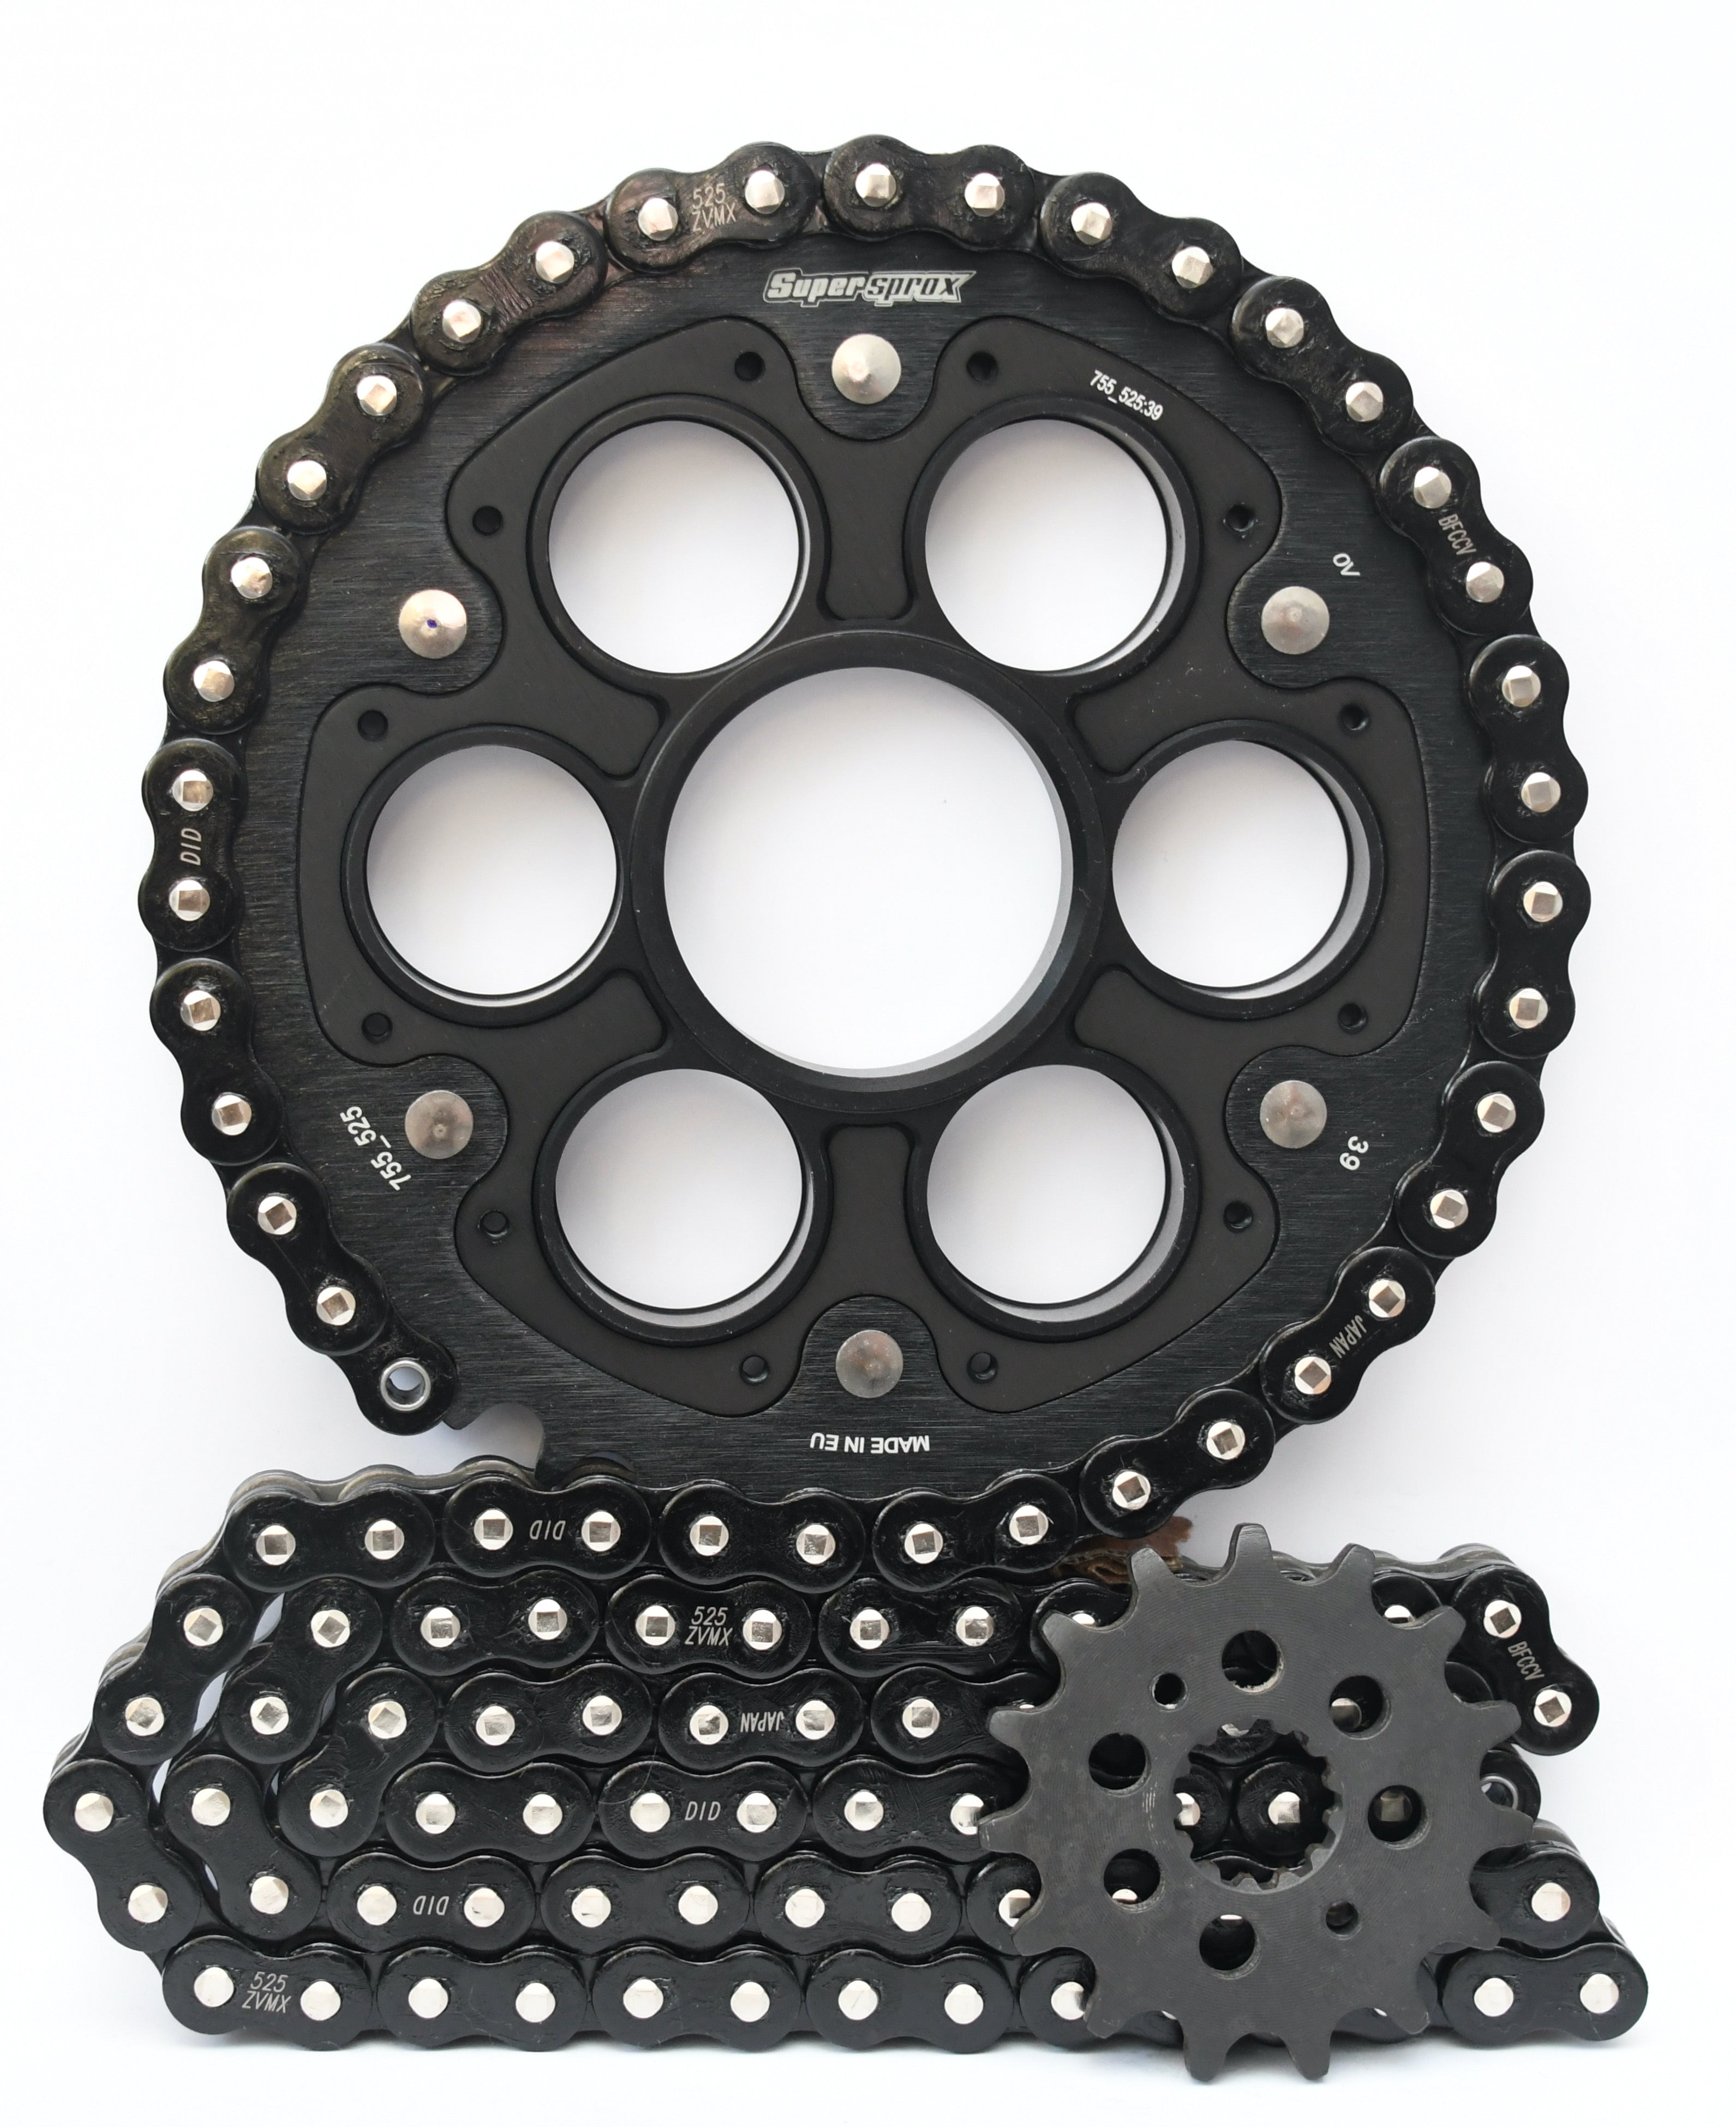 Supersprox Chain & Sprocket Kit for Ducati Panigale 1199 and 1299 - Standard Gearing